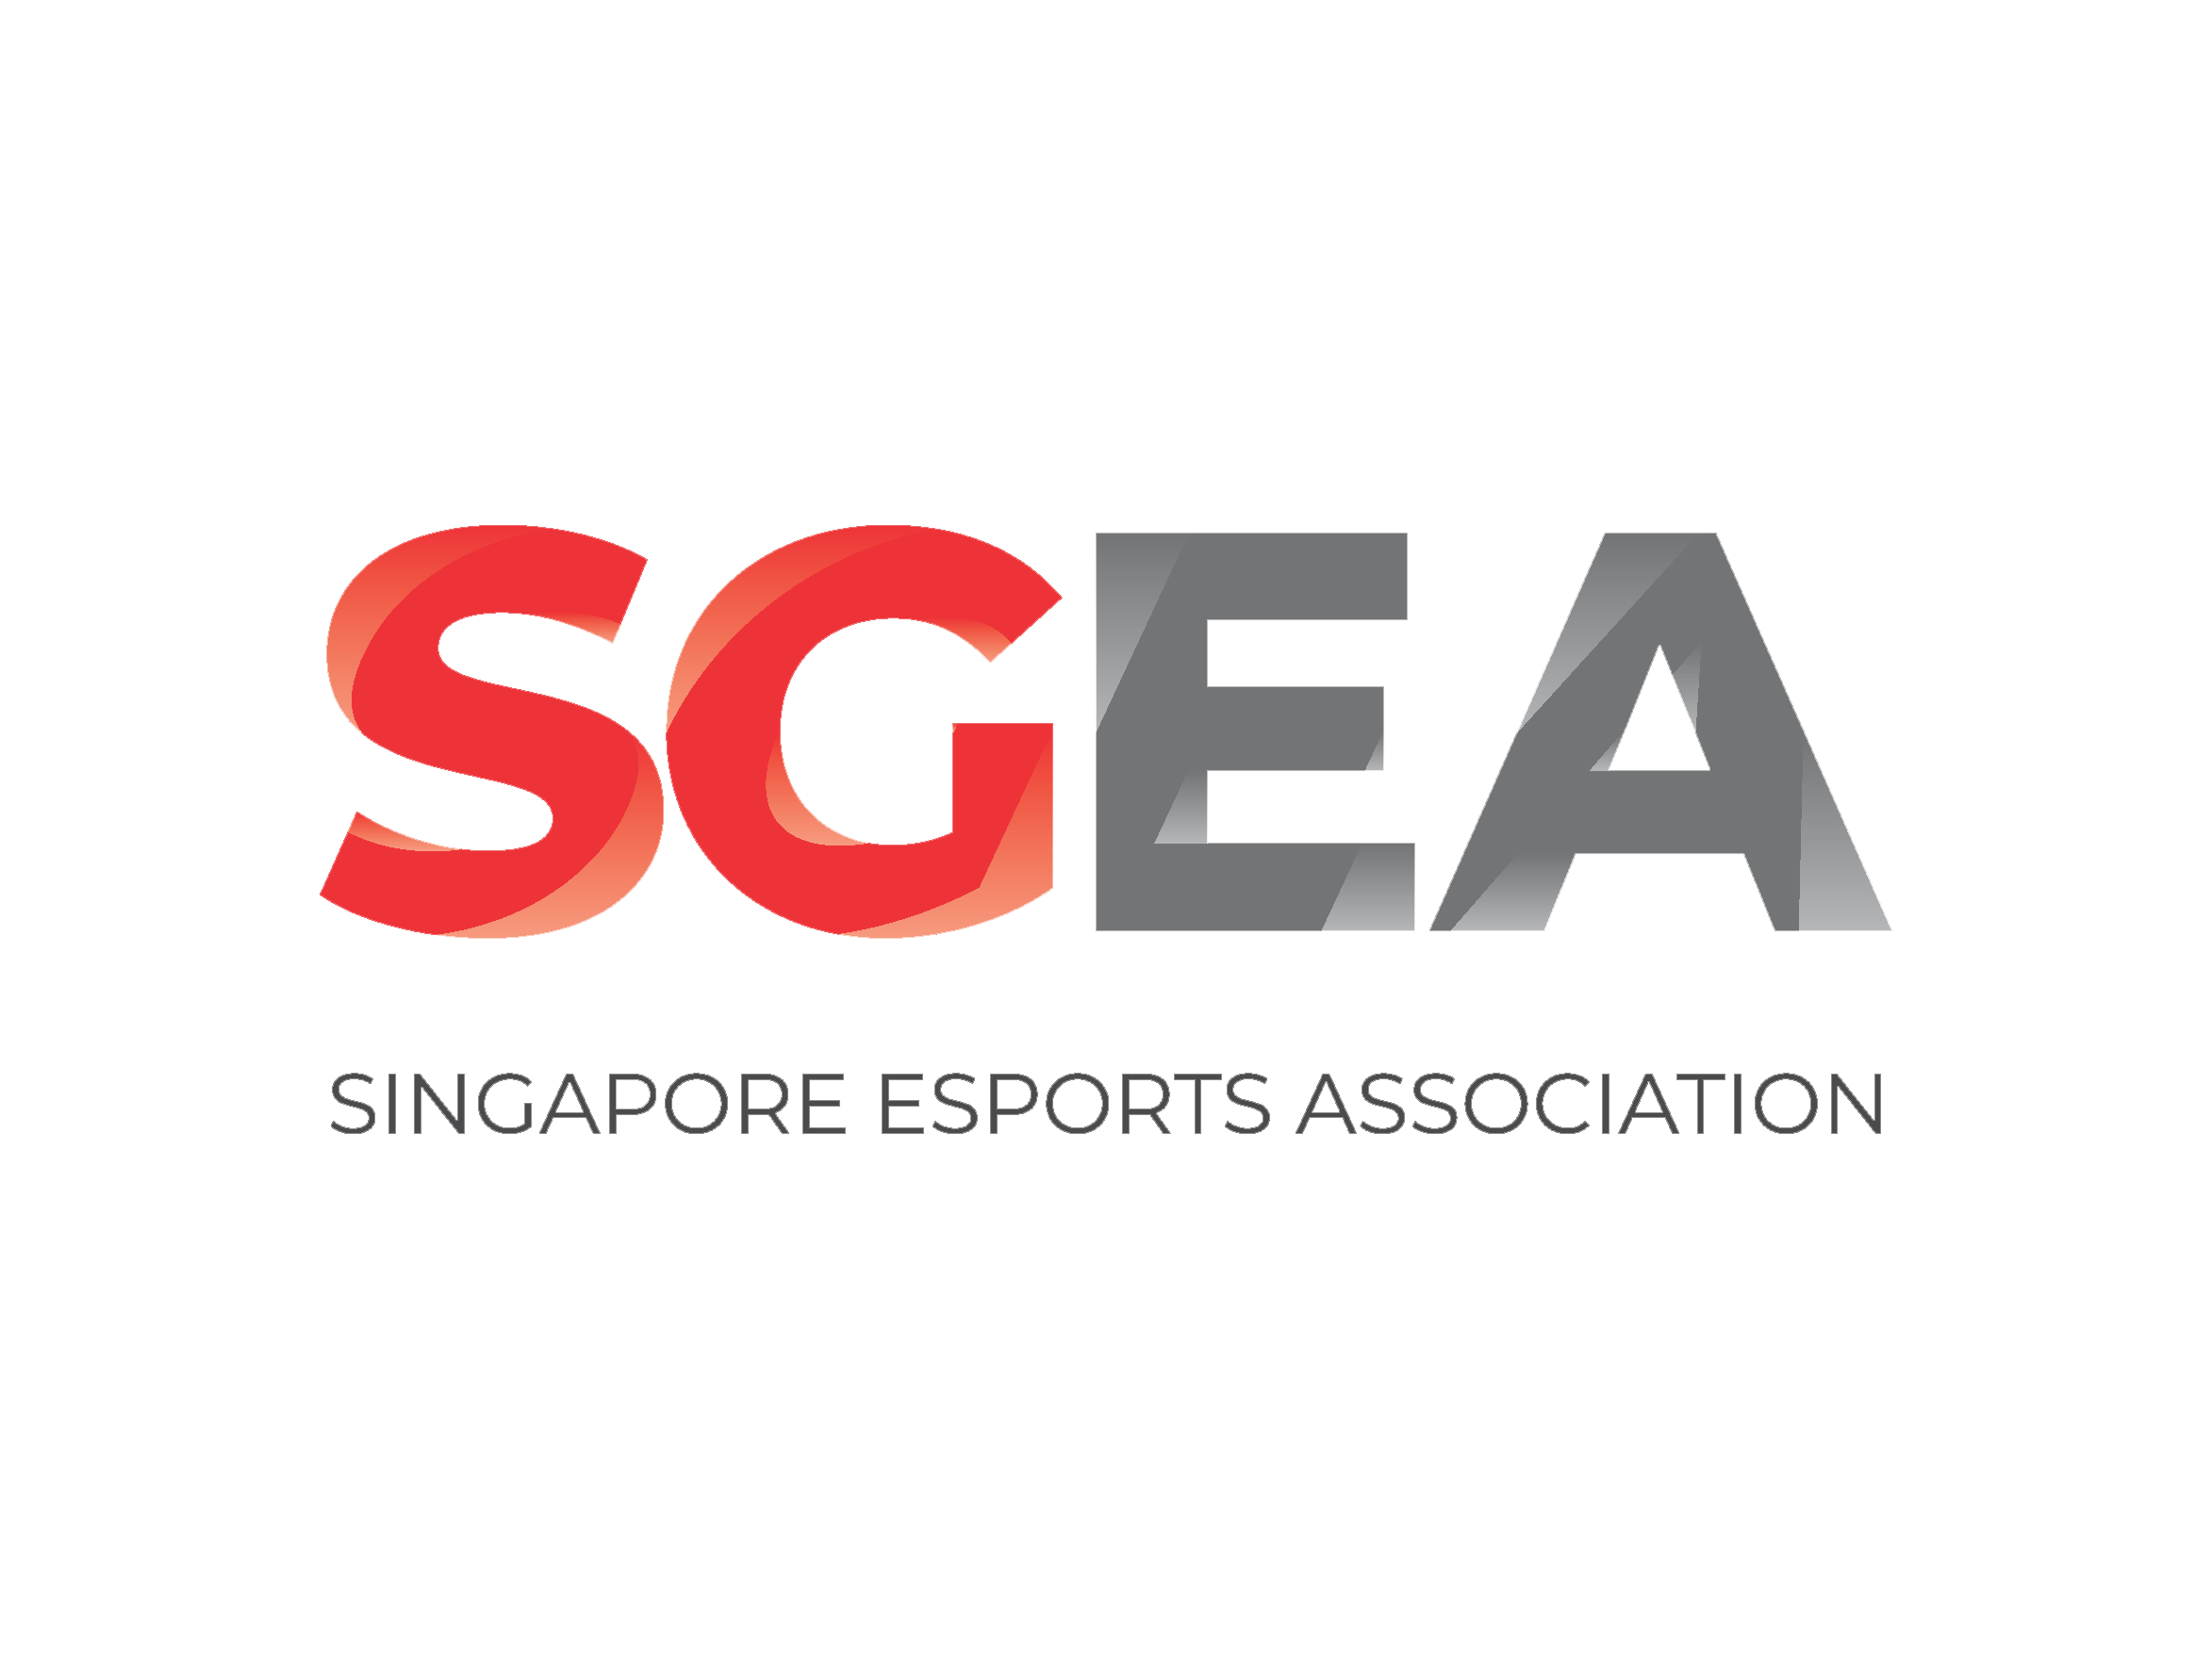 Welcome to the official website of the Singapore Esports Association (SGEA)